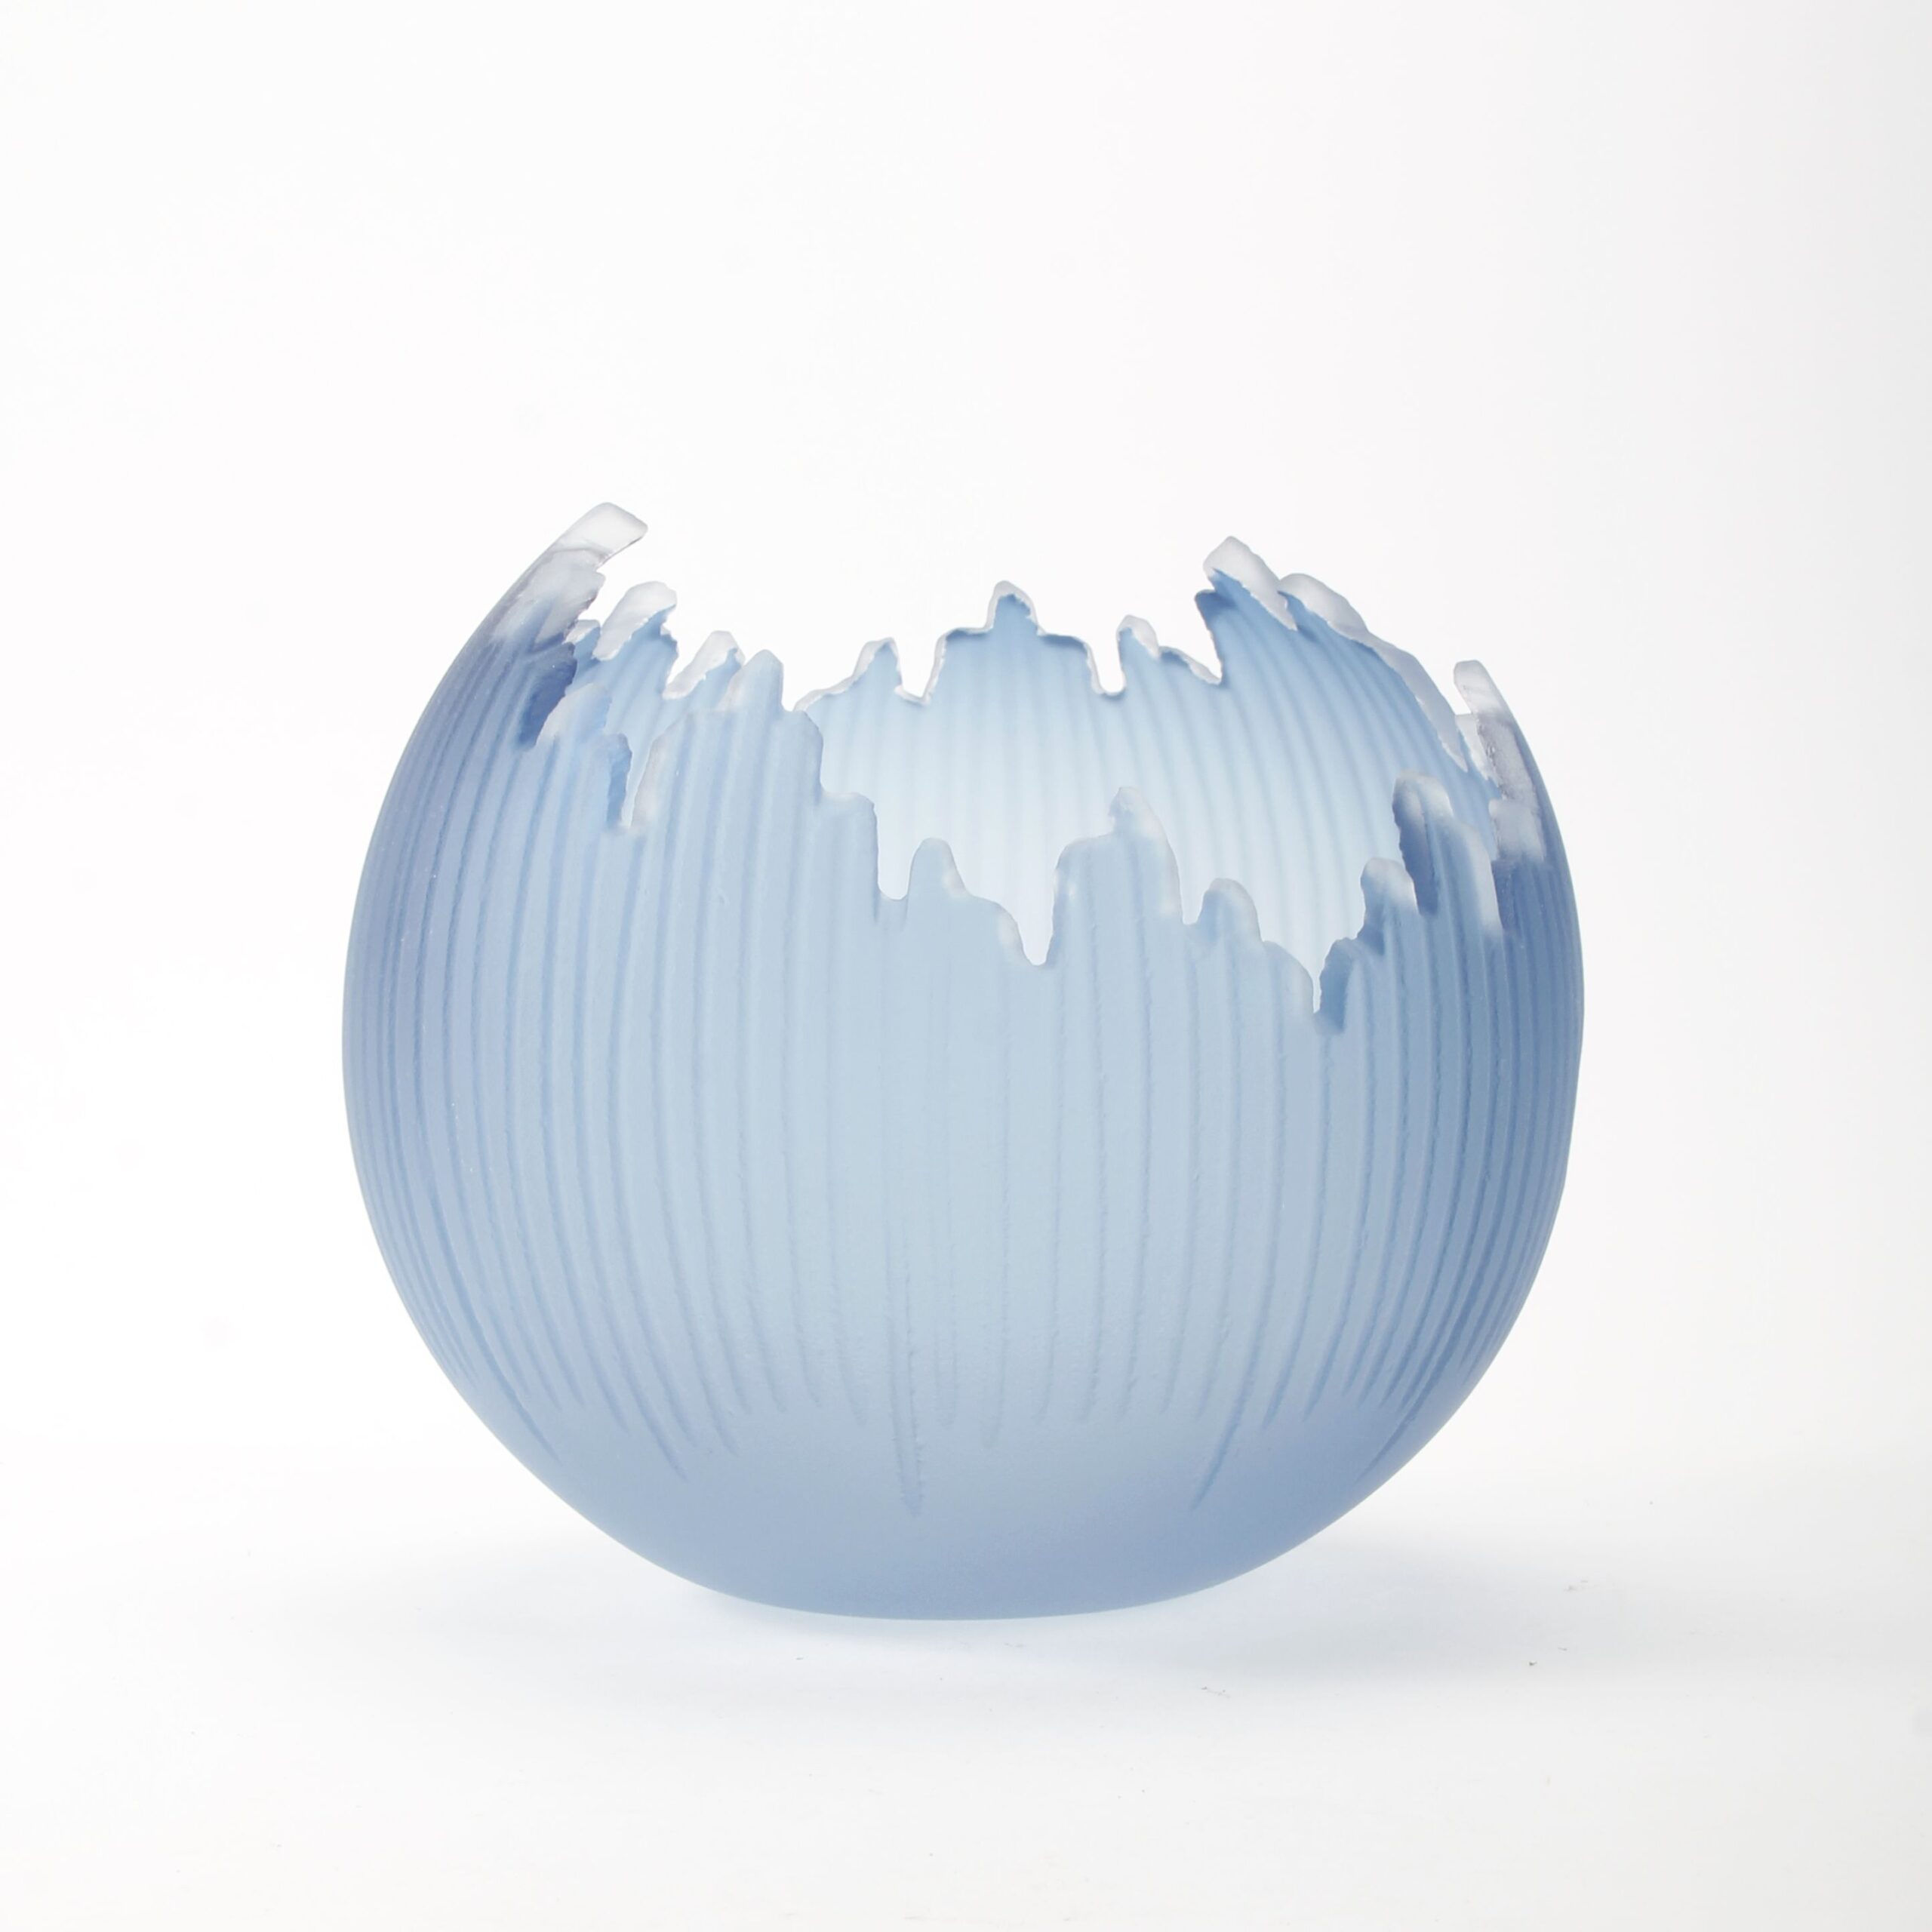 Courtney Downman: Steel Blue Carved Glass Orb Product Image 1 of 2